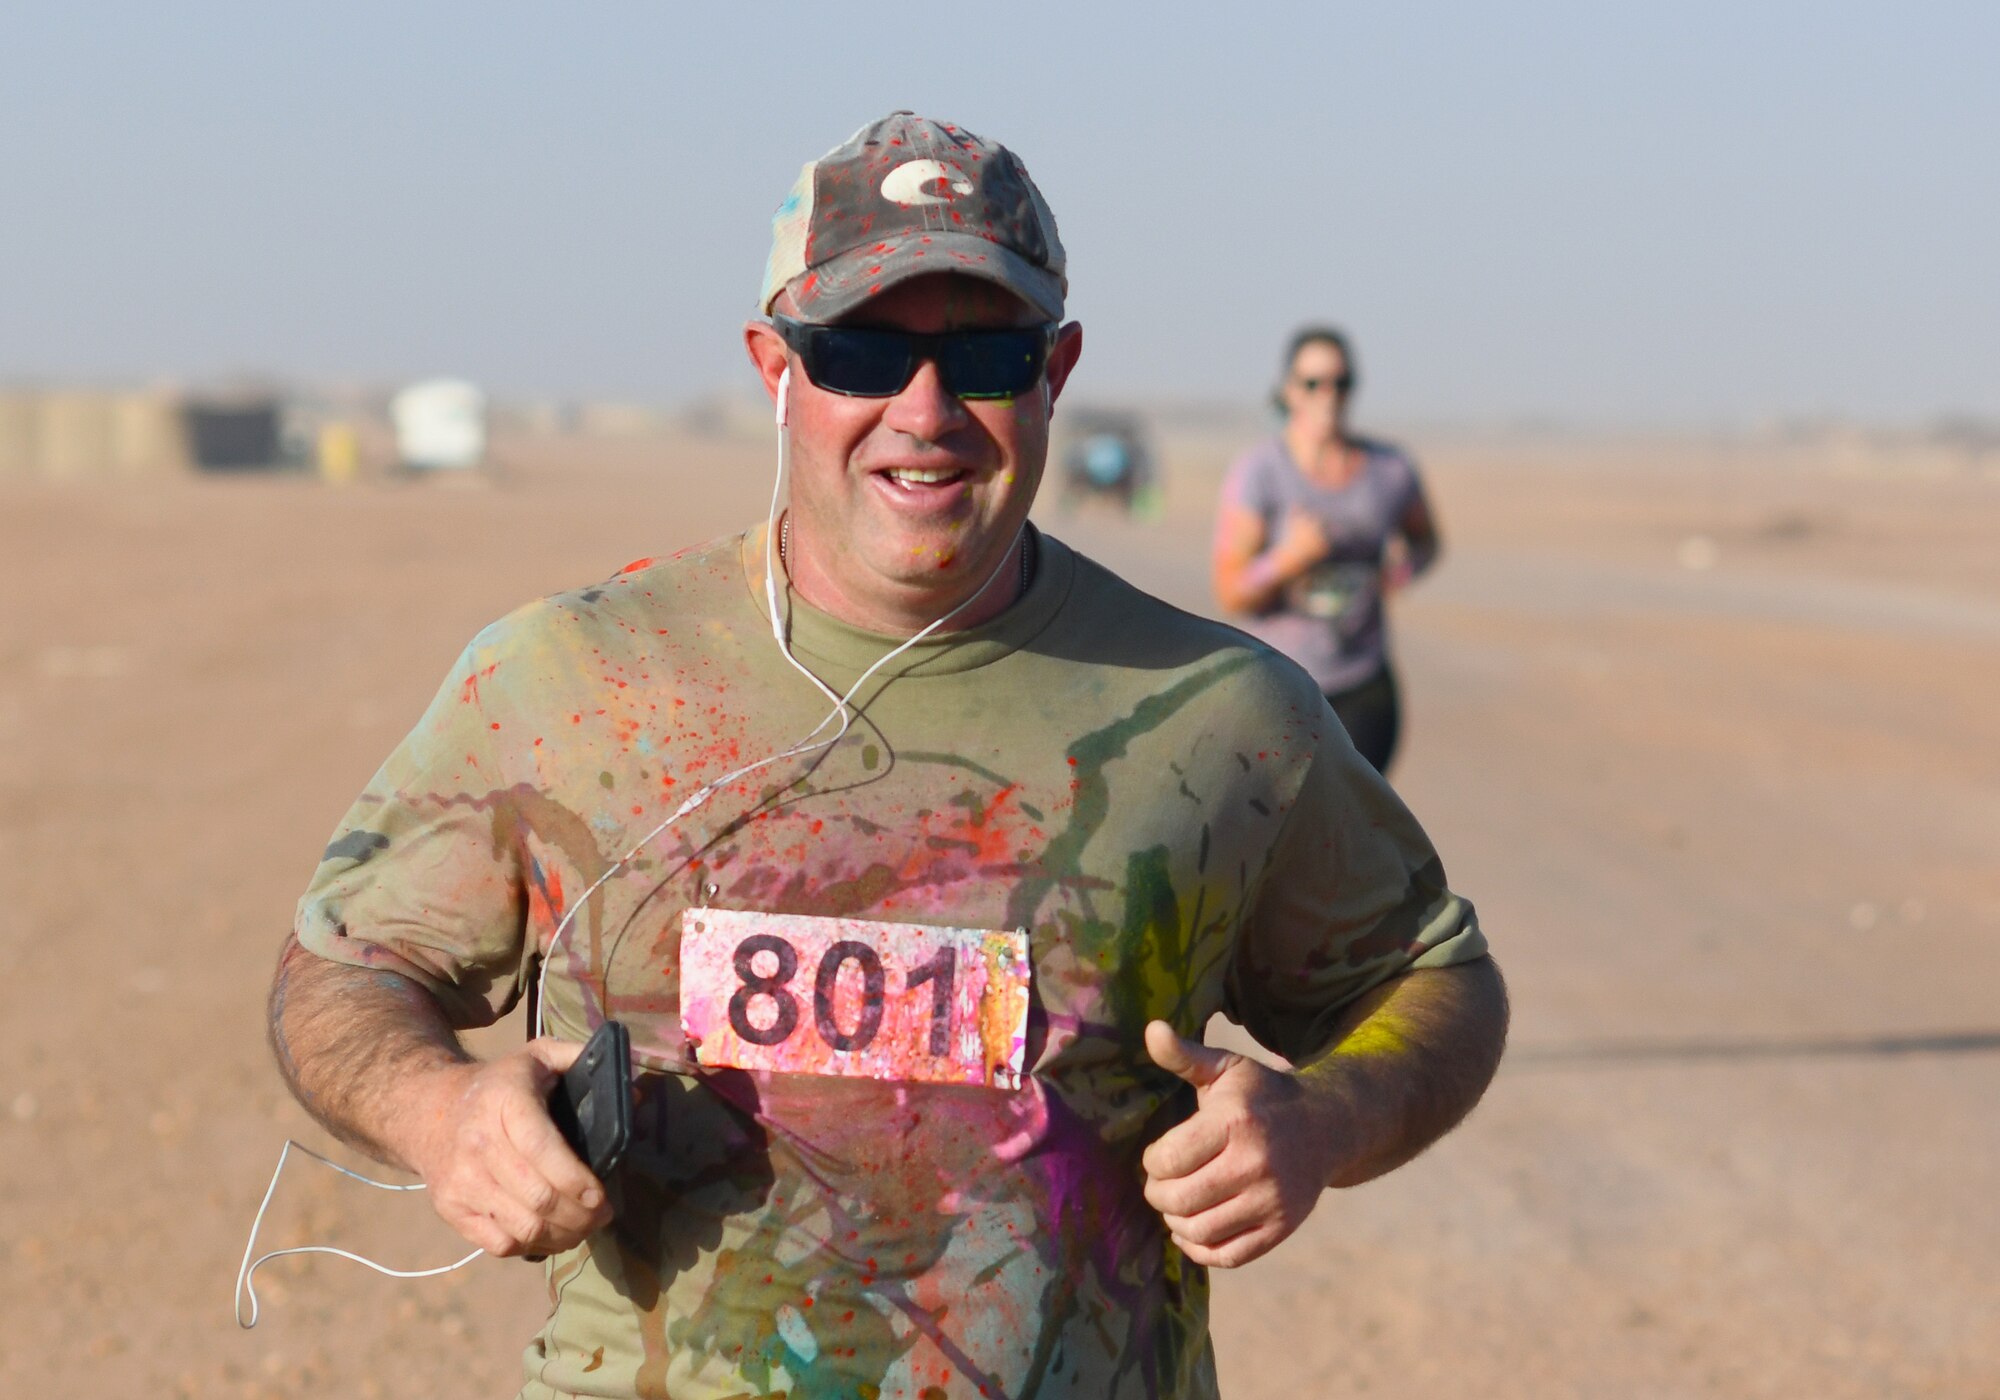 Participants compete in a color run at Nigerien Air Base 201, Niger, Feb. 2, 2020. More than 30 runners and volunteers participated in the event. (U.S. Air Force photo by Tech. Sgt. Alex Fox Echols III)